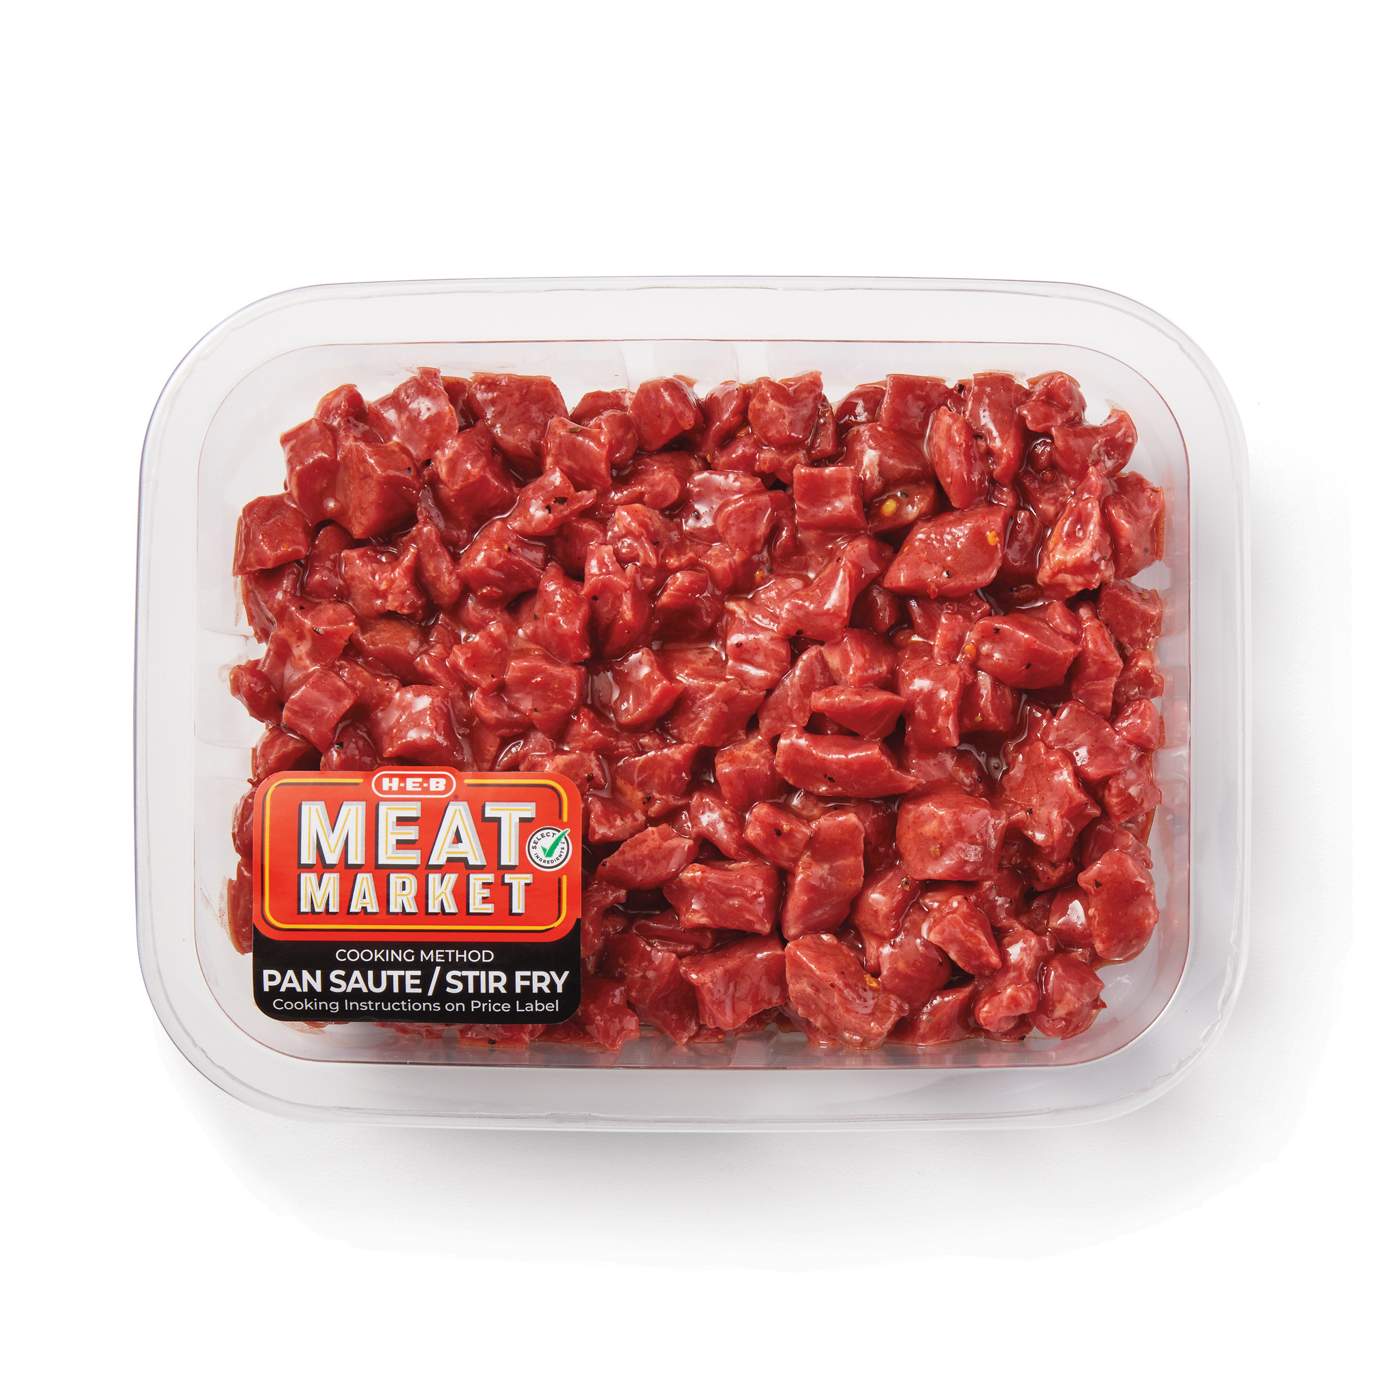 H-E-B Meat Market Marinated Diced Beef - Chile Lime; image 1 of 3